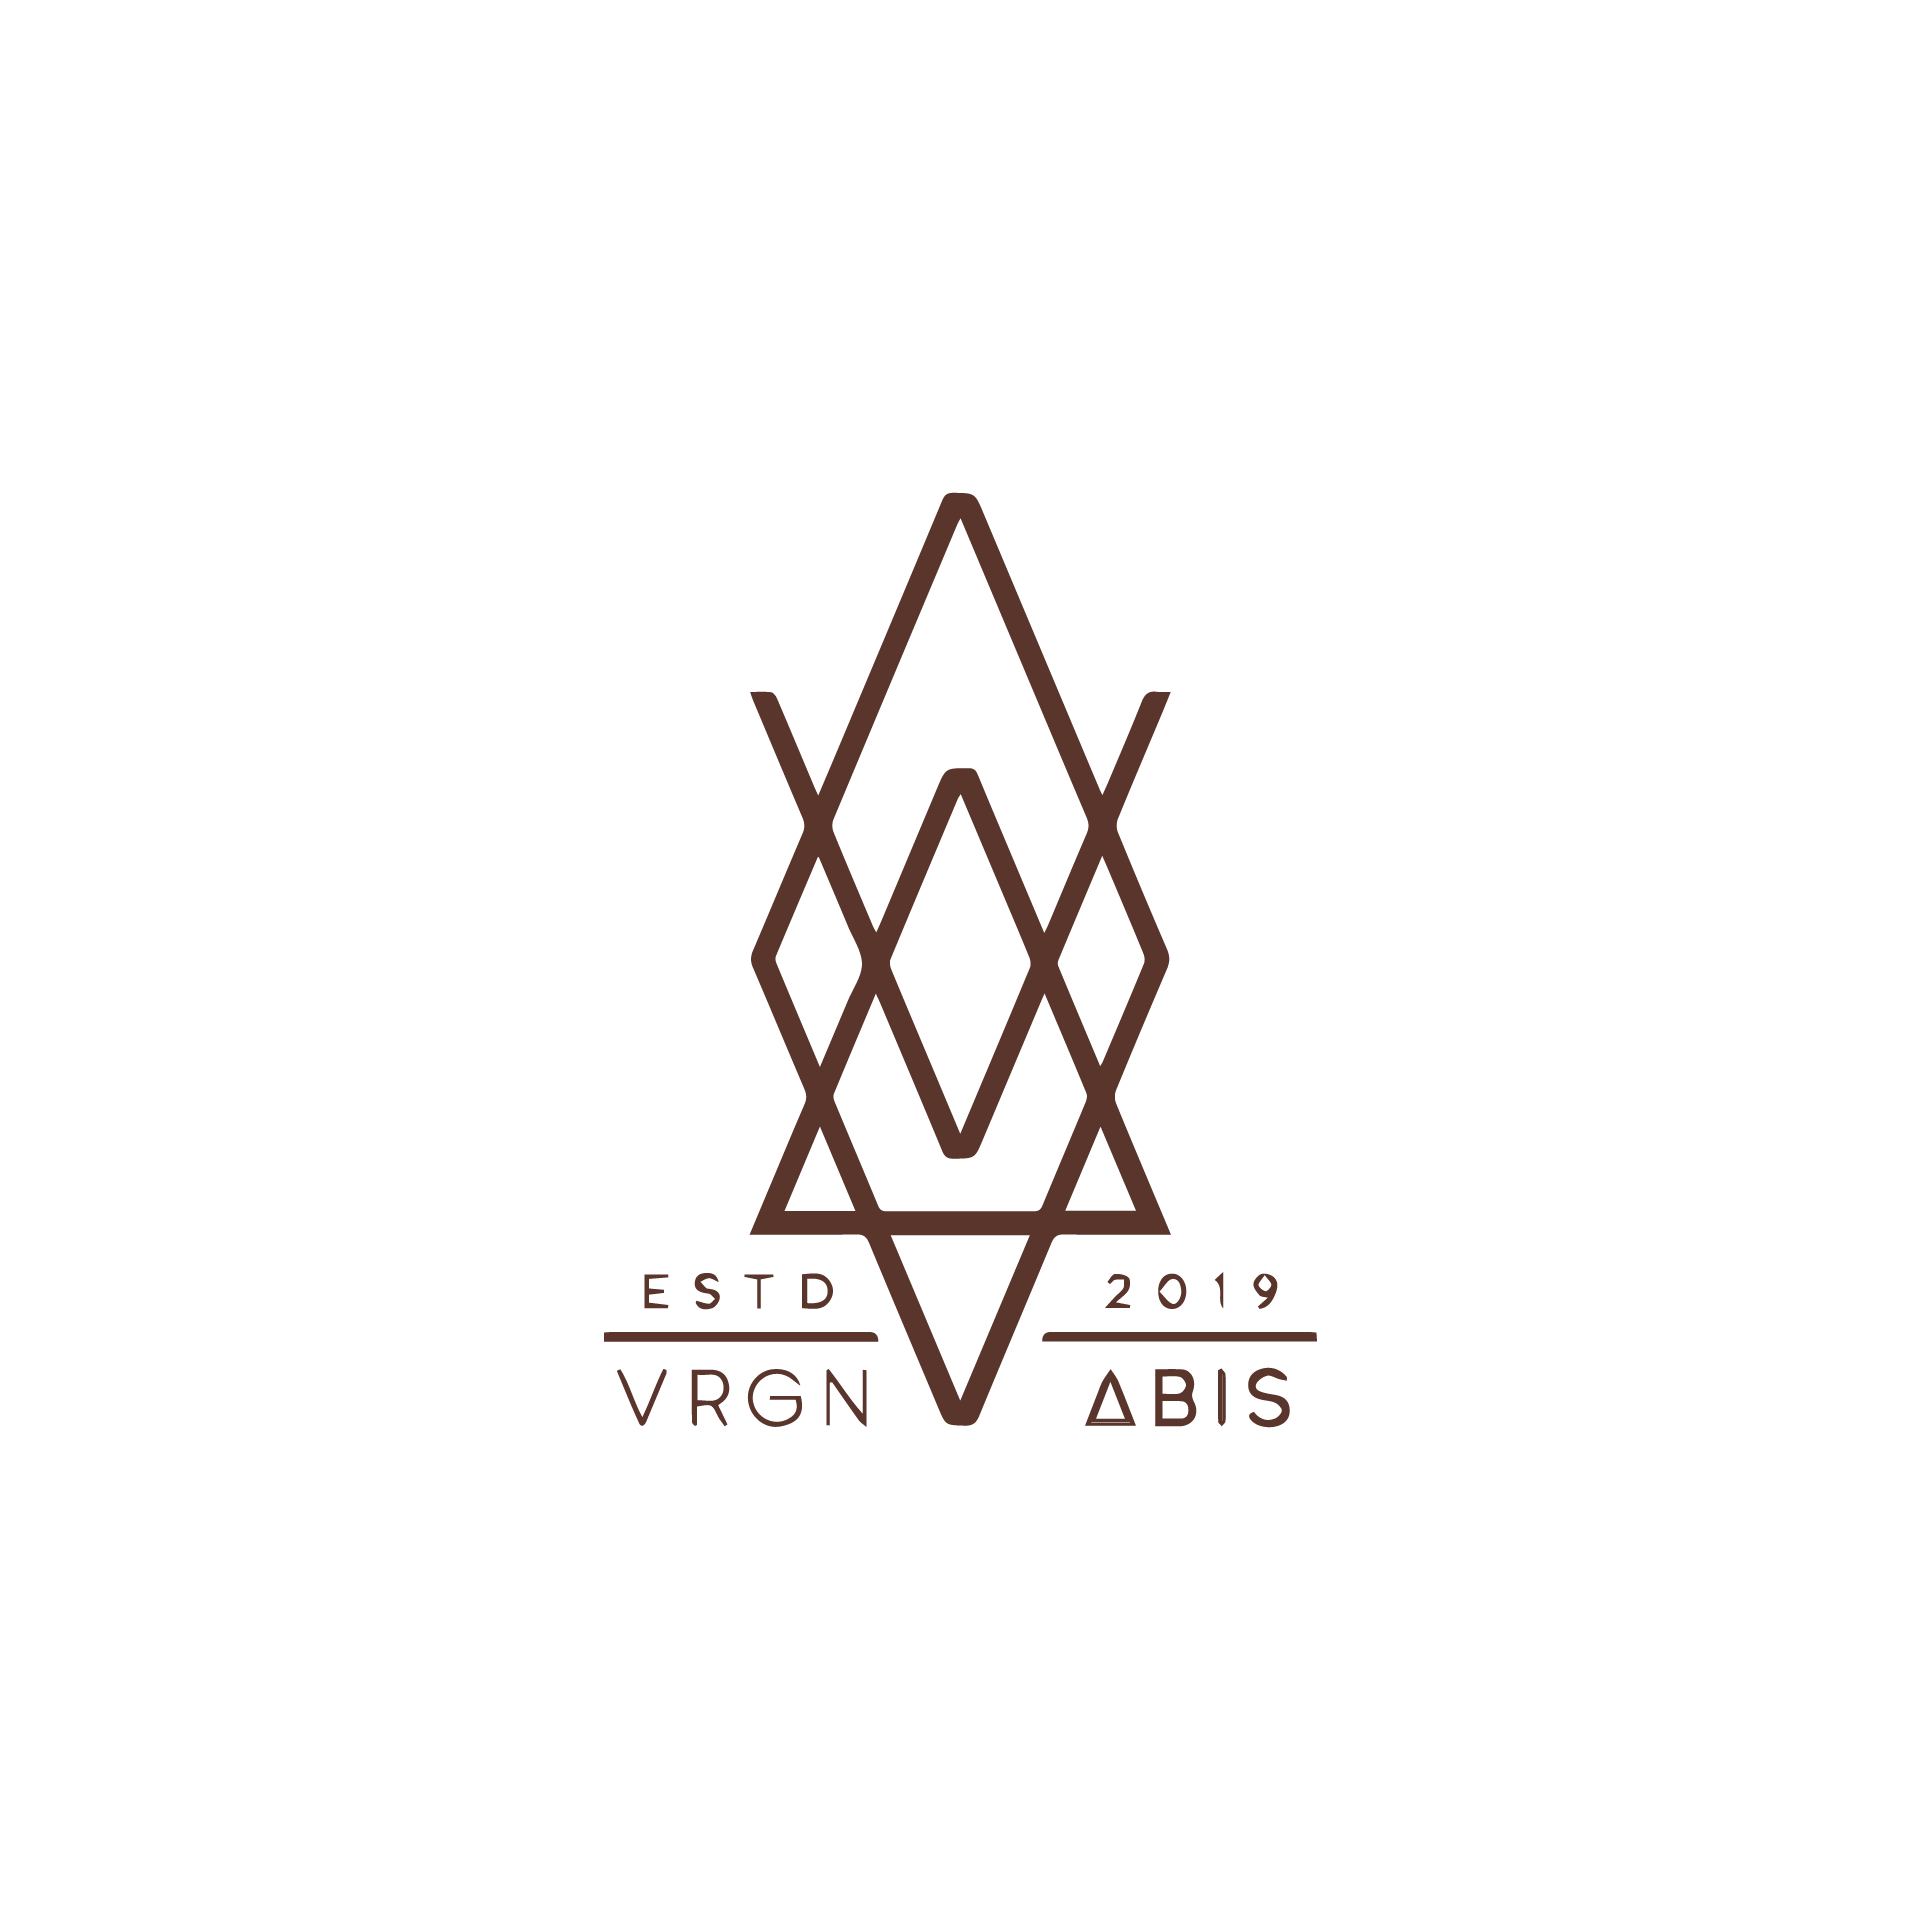 Virgin Abis is a cannabis store on the island of St. John in the U.S. Virgin Islands. They are focused on providing the island community with high quality, effective, safe hemp and CBD products from trusted sources.  